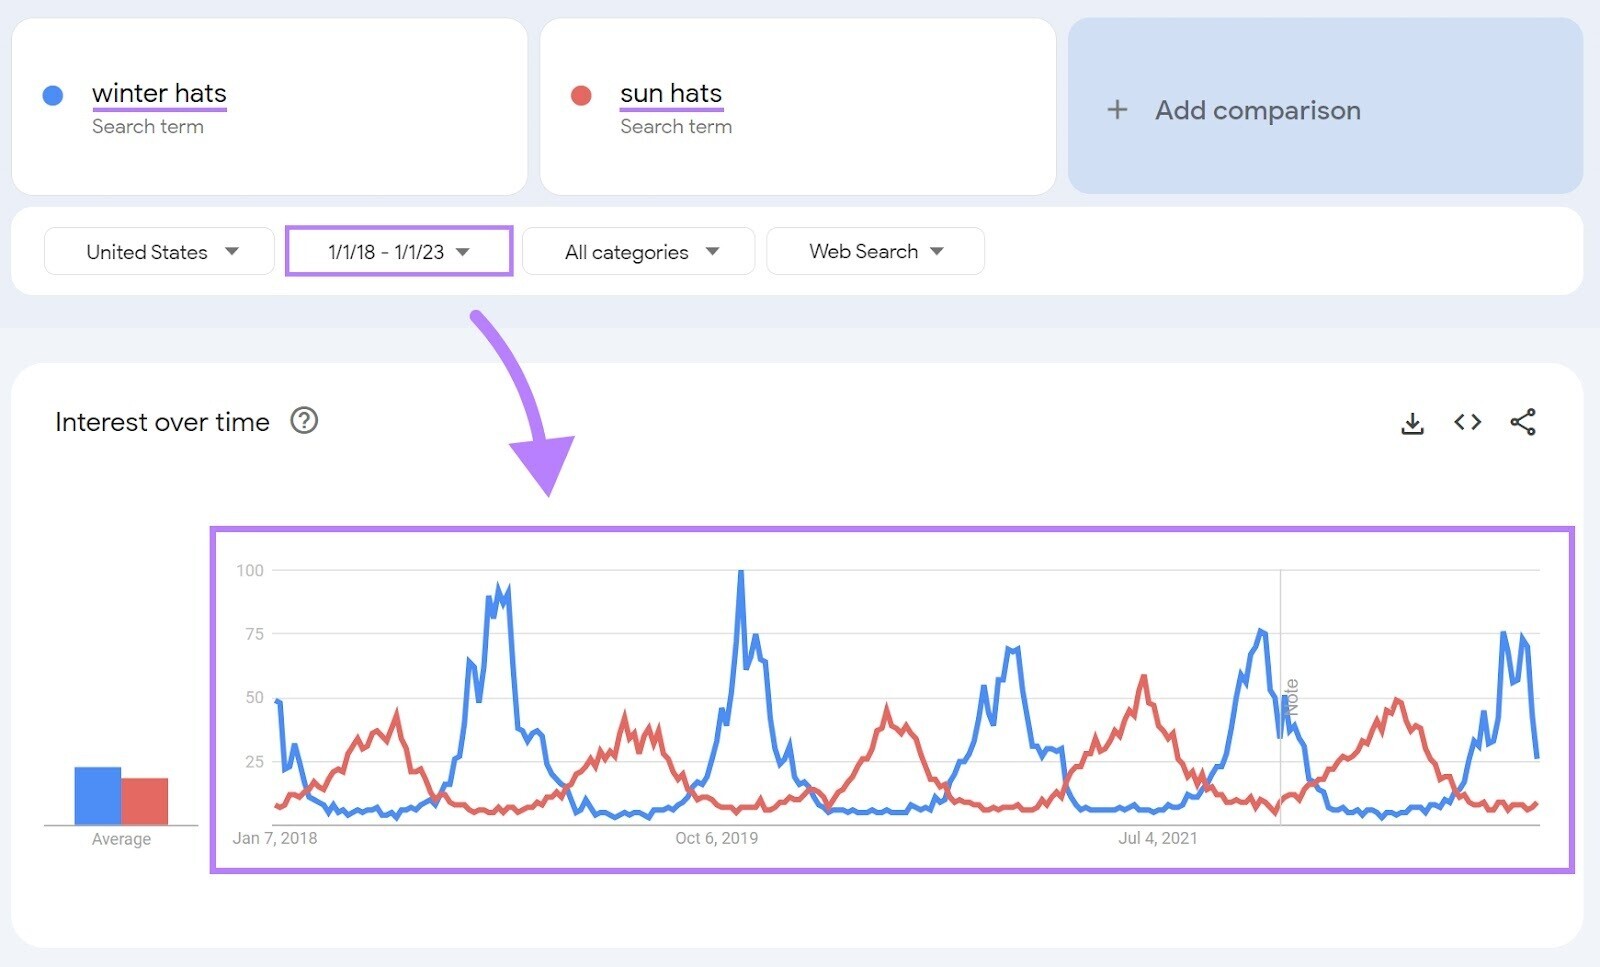 Google Trends interest over time graph showing results for winter hats and sun hats